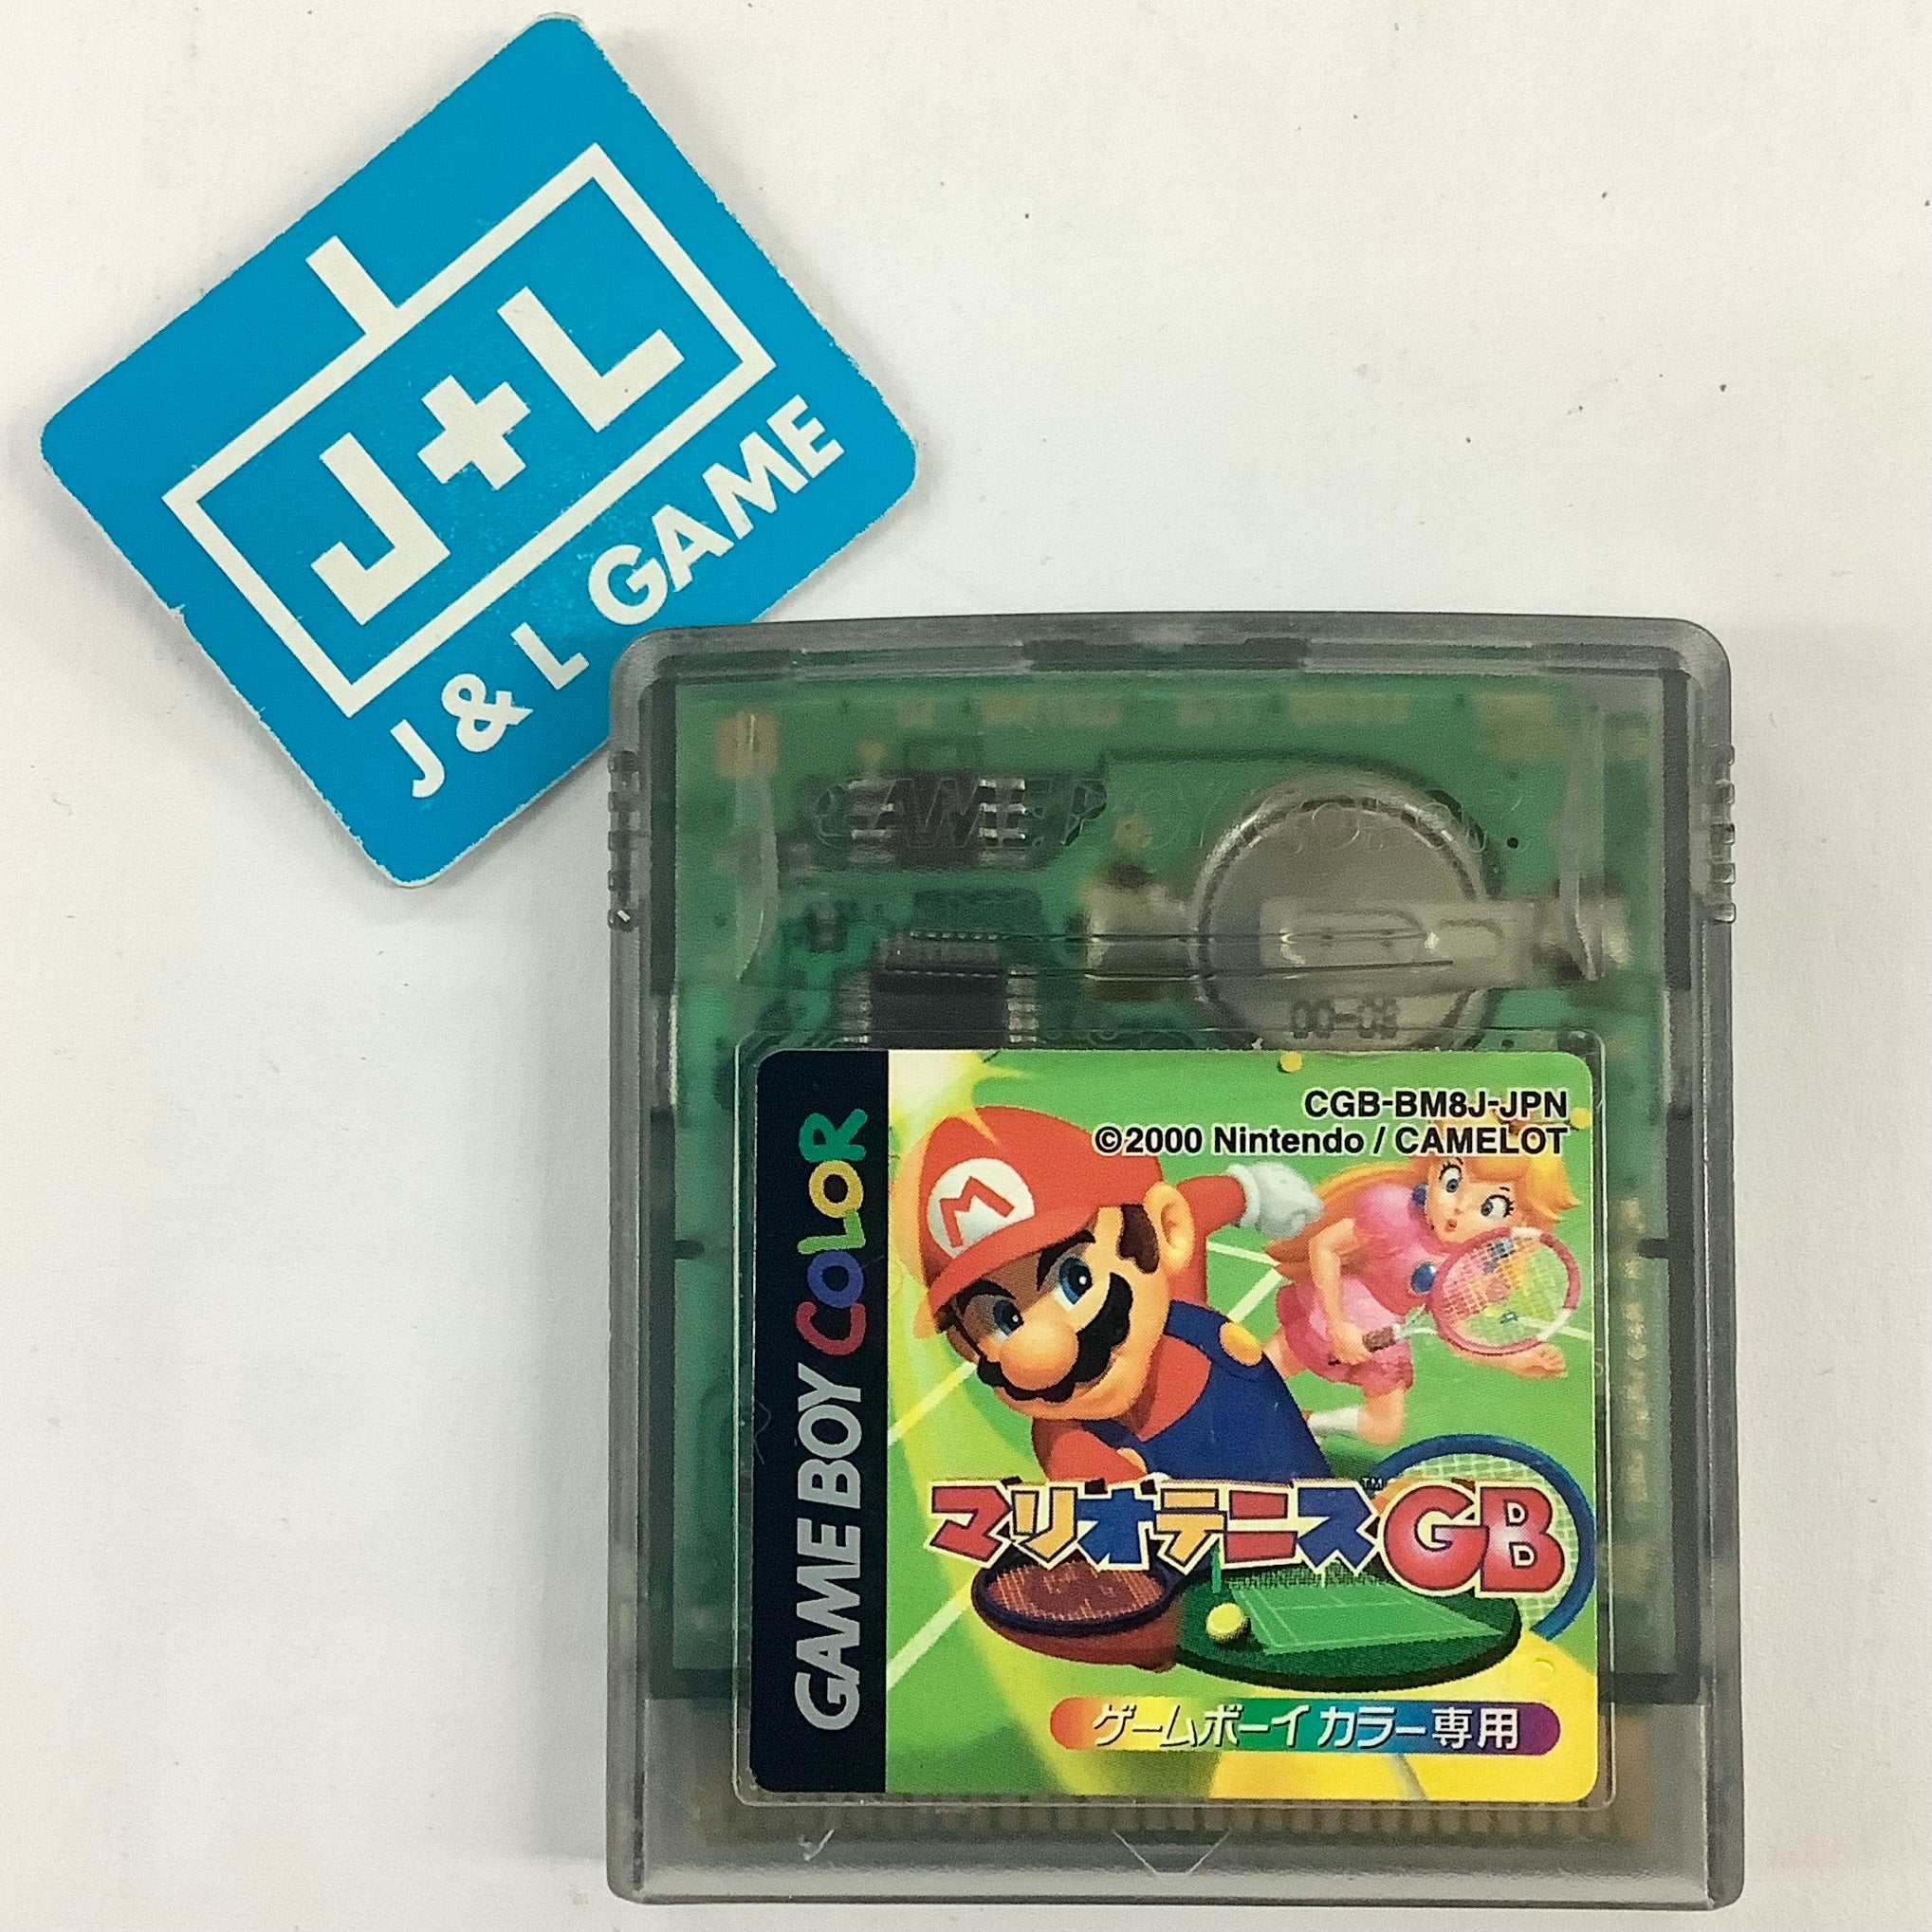 Mario Tennis GB - (GBC) Game Boy Color [Pre-Owned] (Japanese Import)